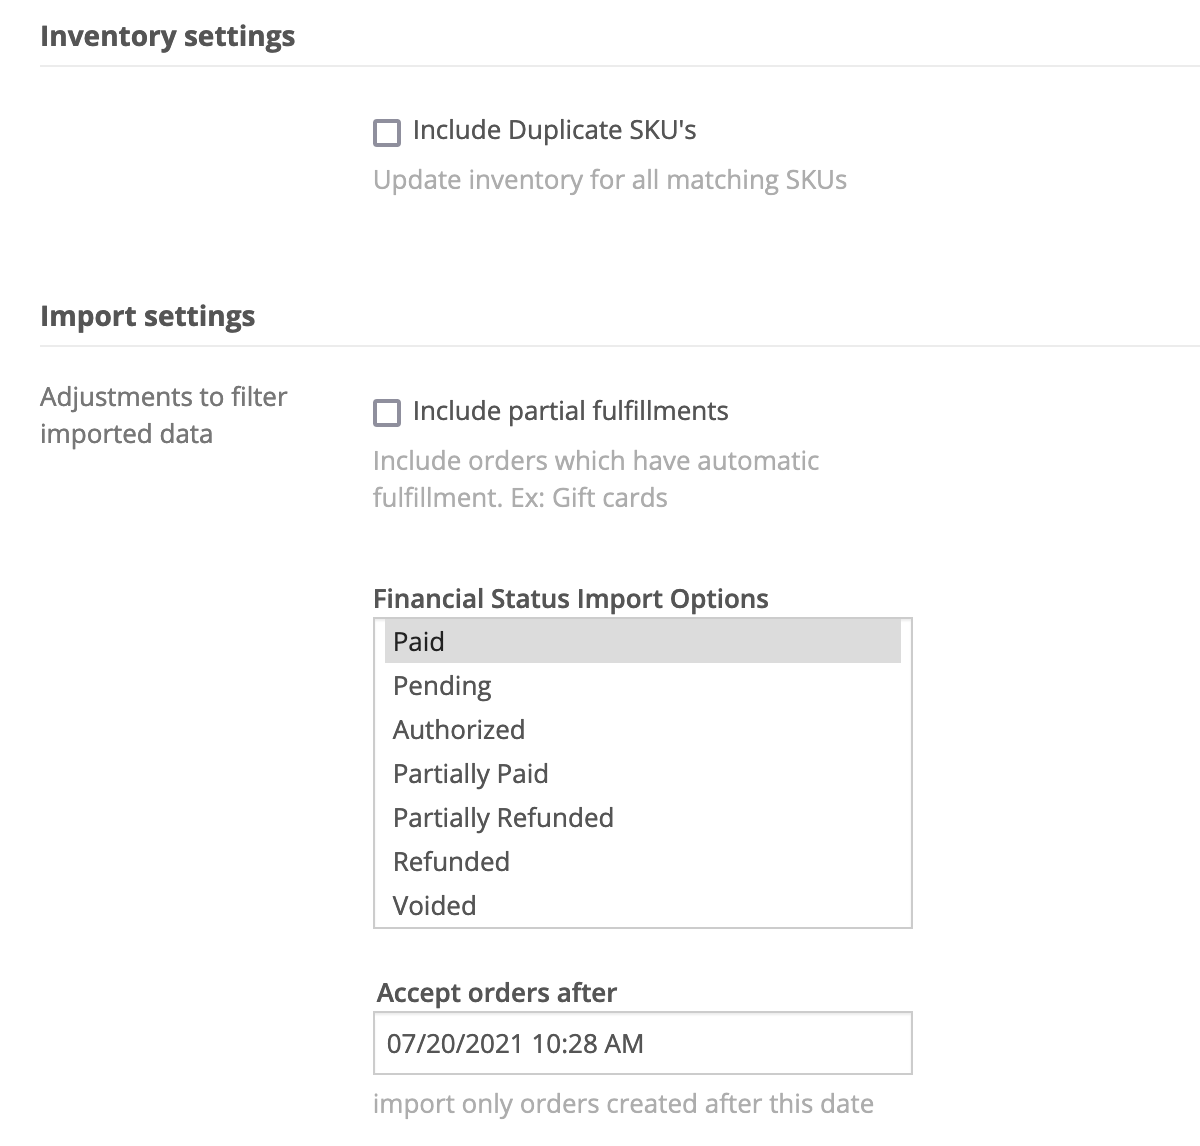 Shopify inventory and import settings